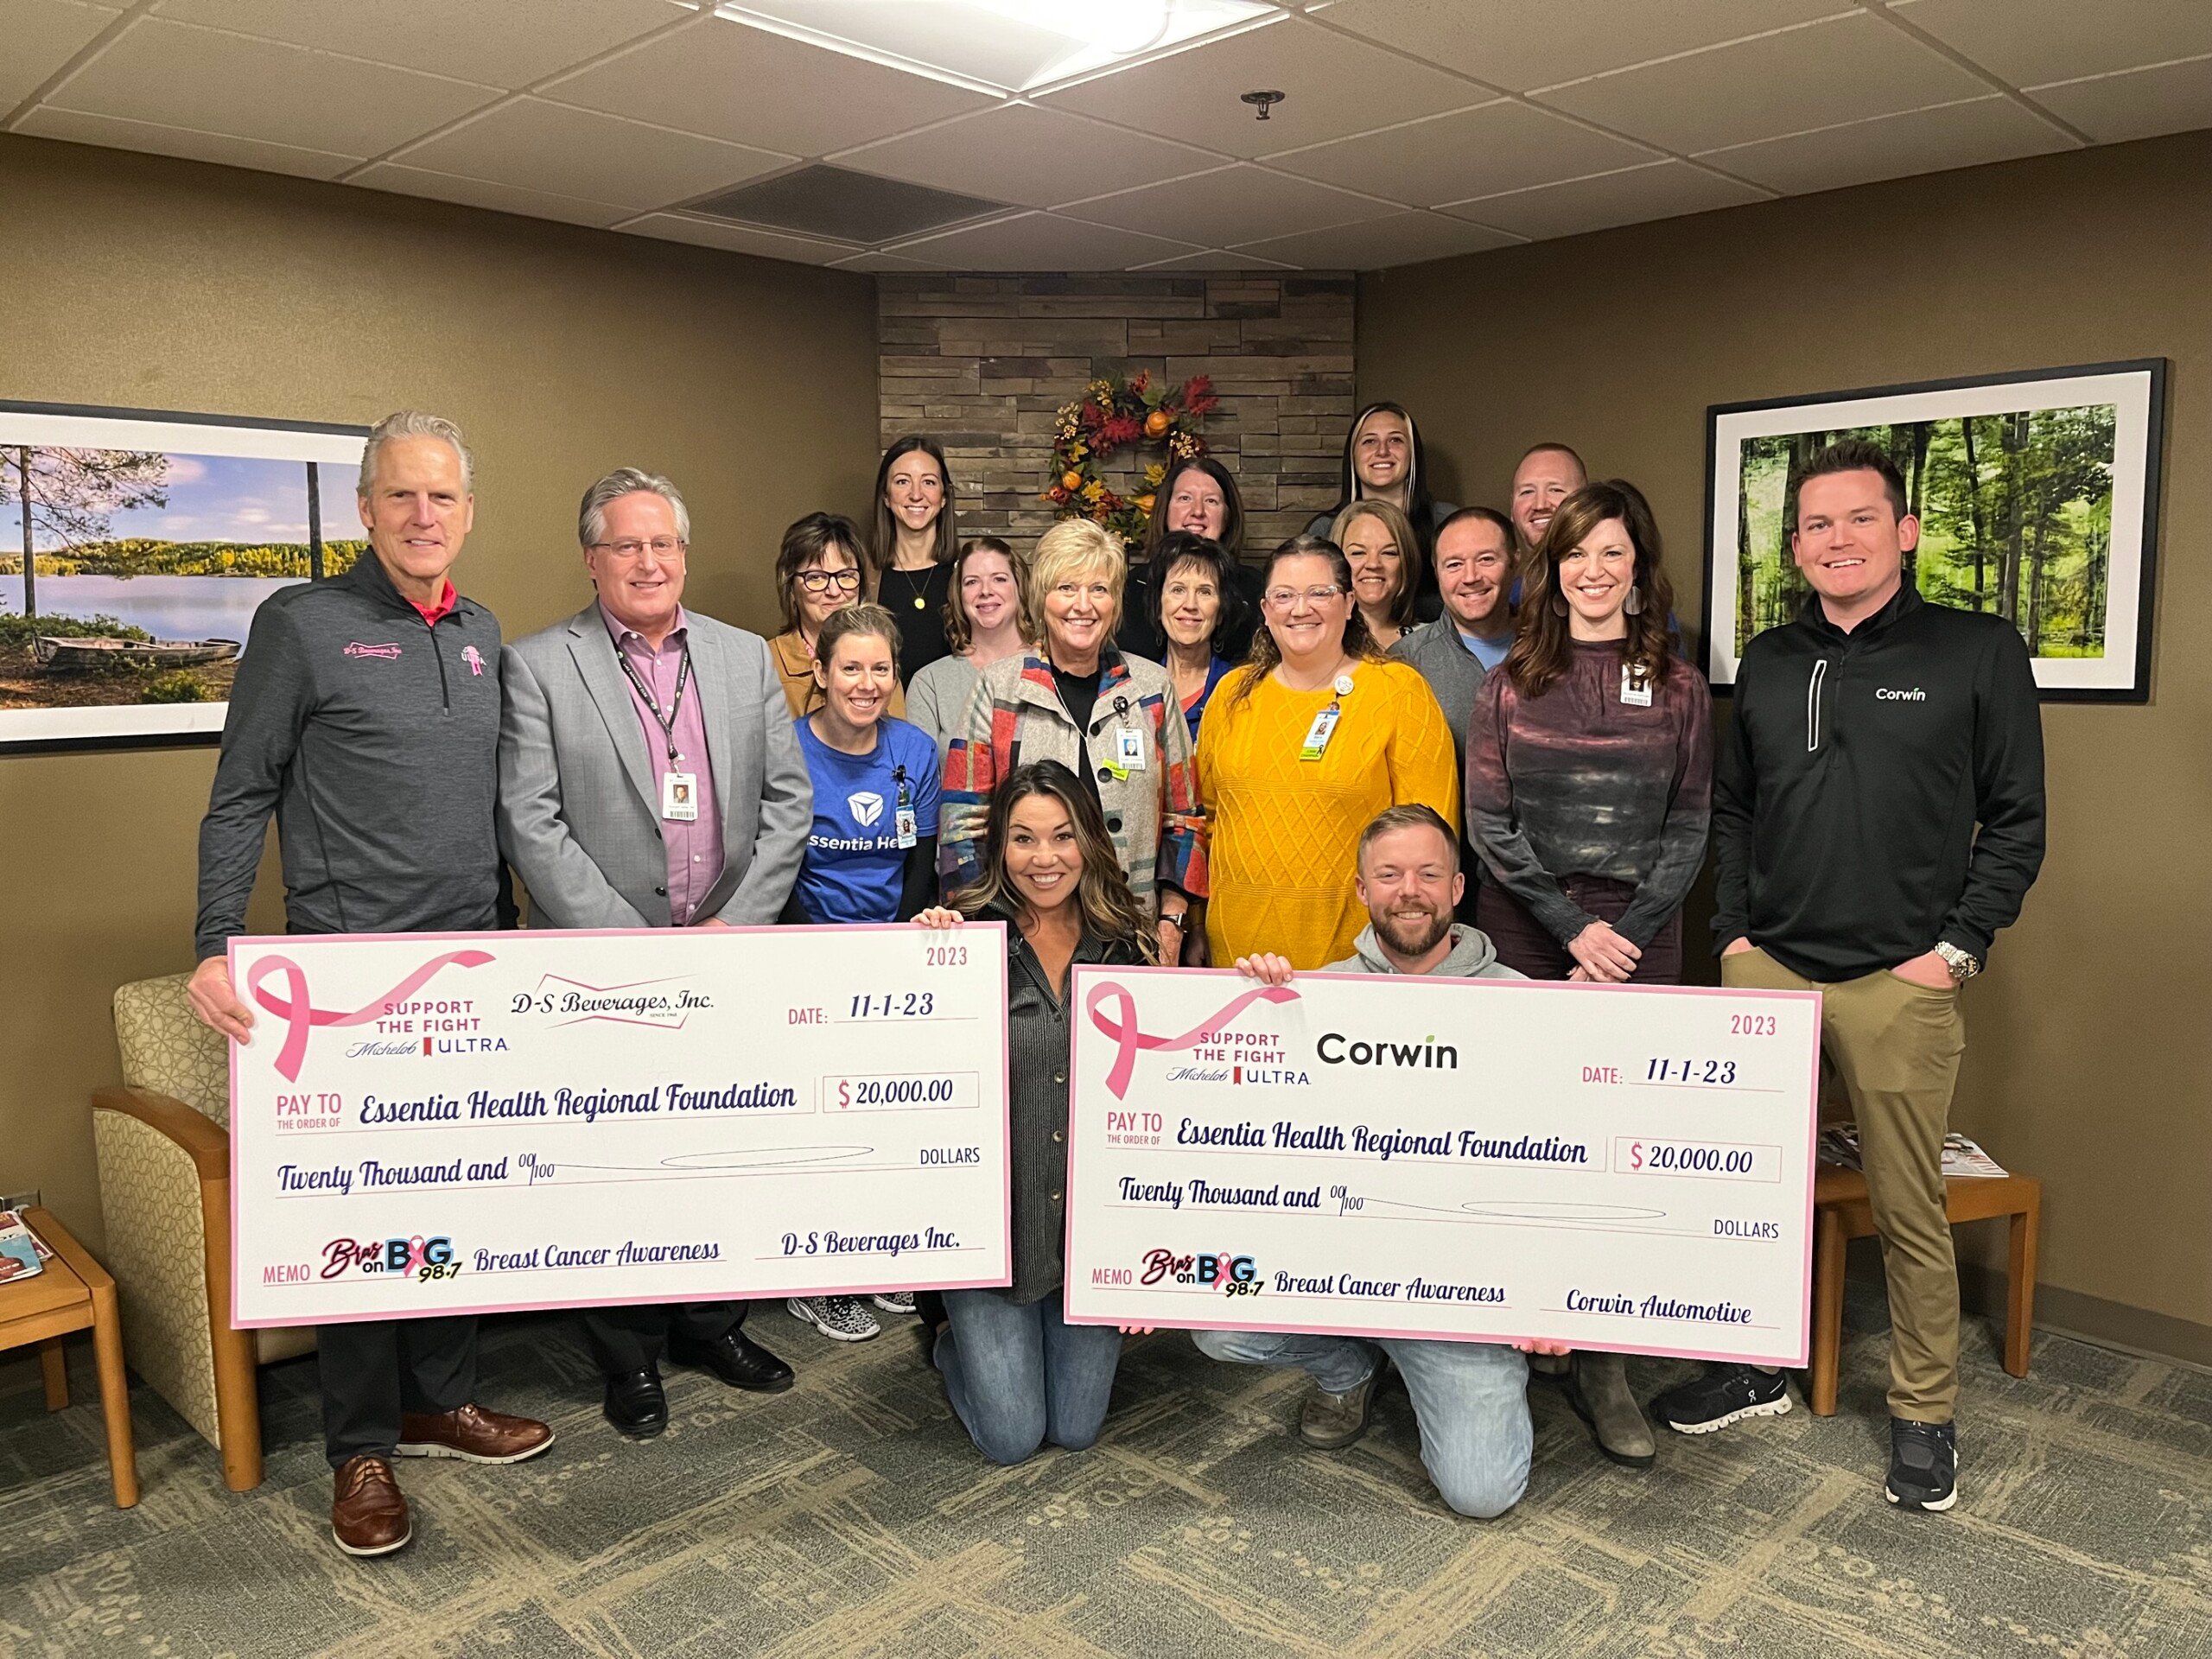 Bras on Big 98.7' campaign results in $40,000 for Essentia Health breast cancer  patients - KVRR Local News